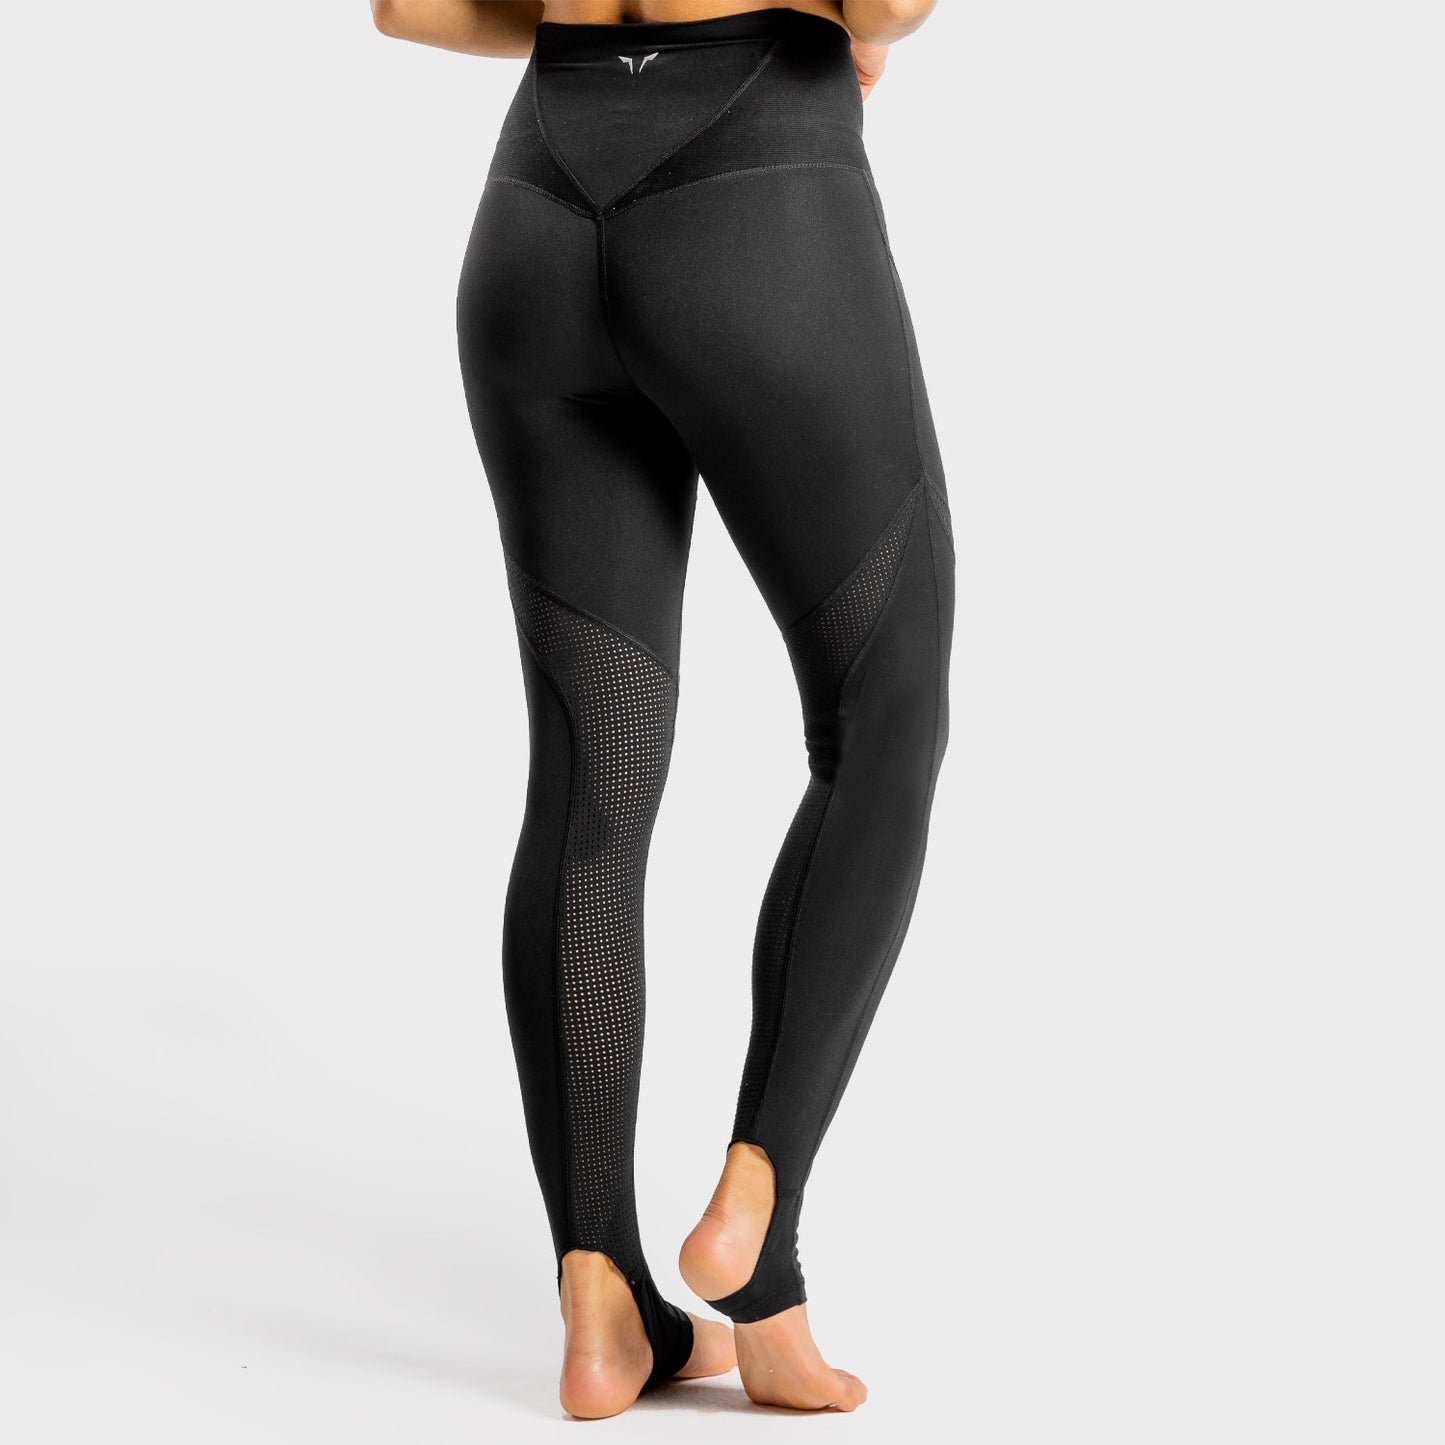 squatwolf-gym-leggings-for-women-wolf-leggings-black-workout-clothes